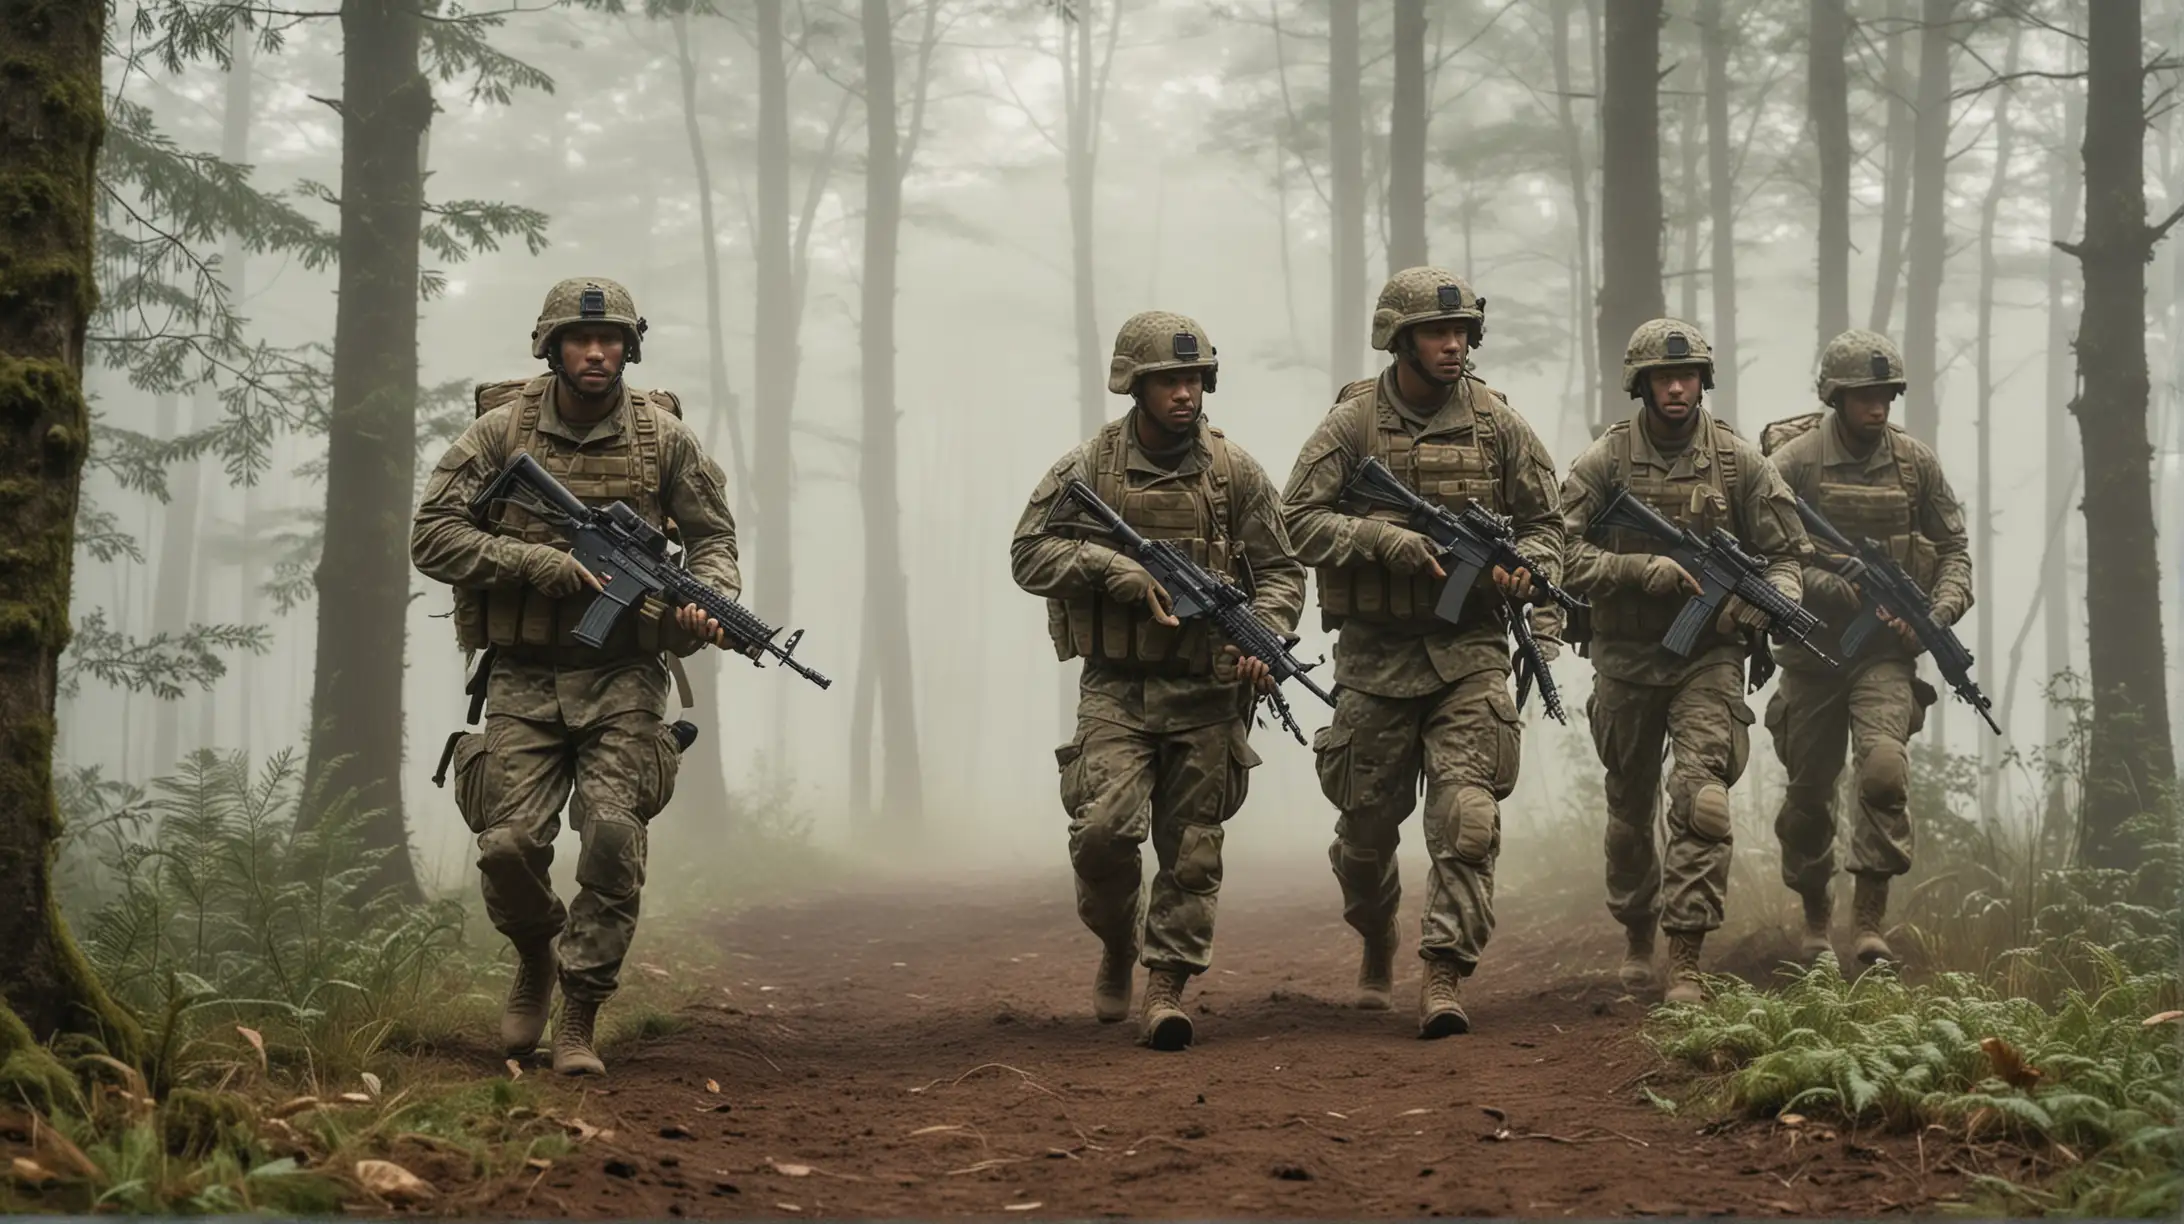 Diverse Modern Army Soldiers Marching in Foggy Forest